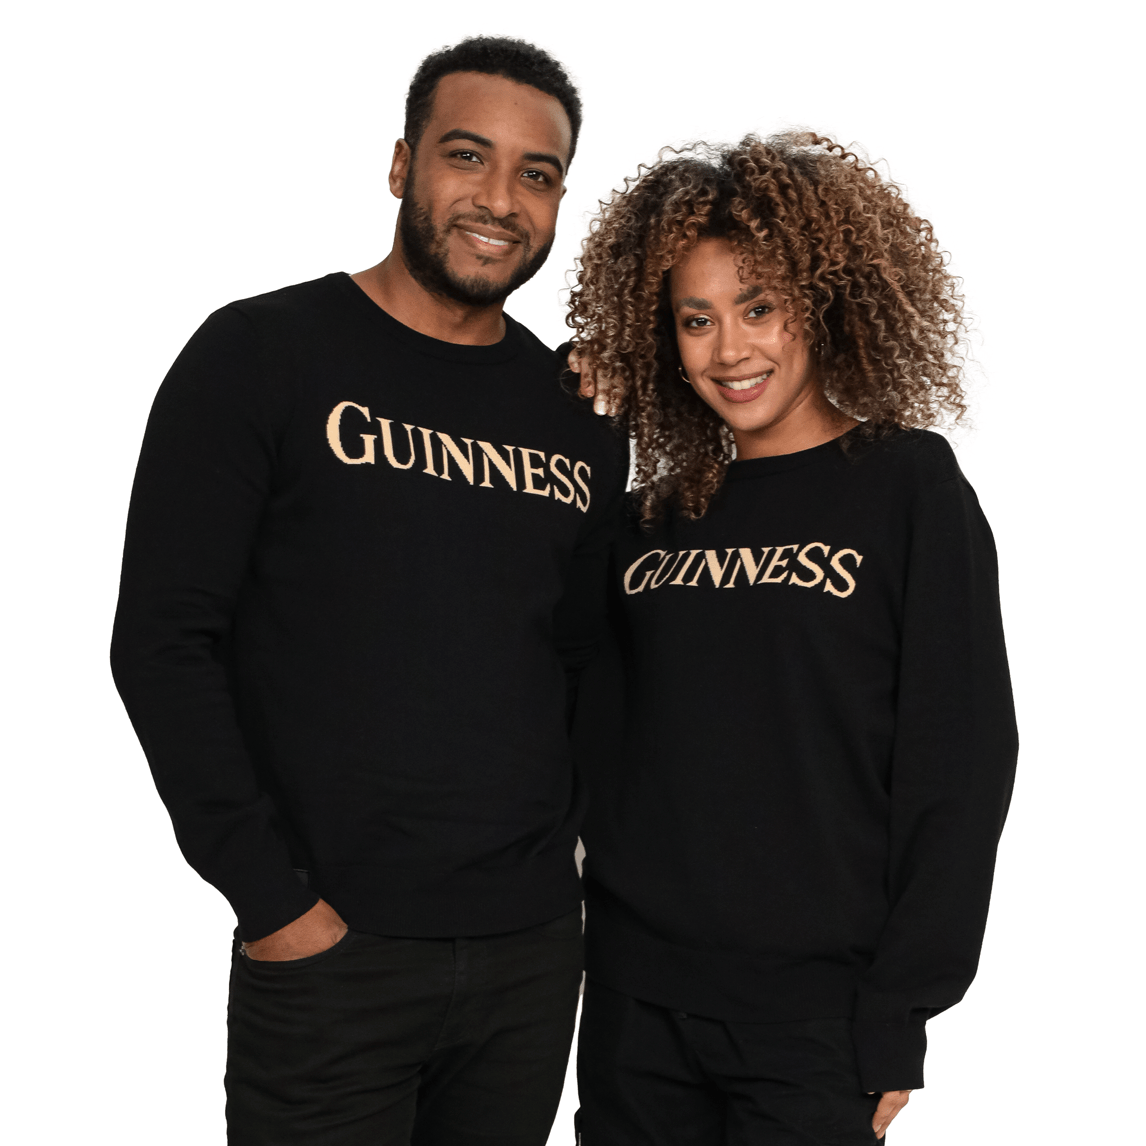 A man and woman wearing a Guinness 100% Organic Cotton Jumper made by Guinness.